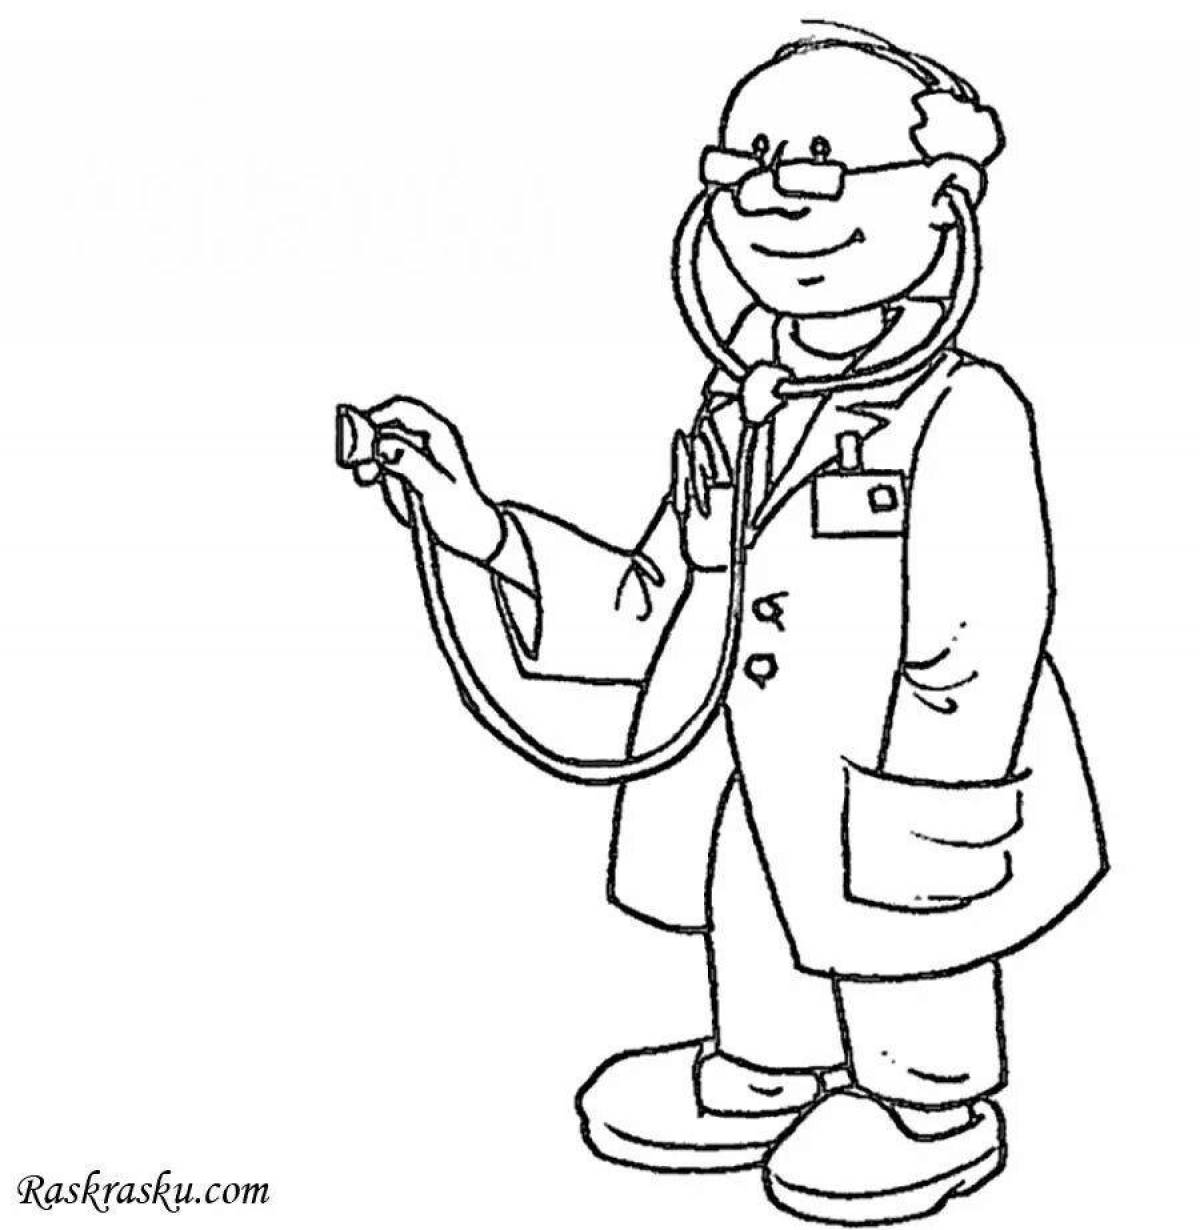 Amazing doctor profession coloring page